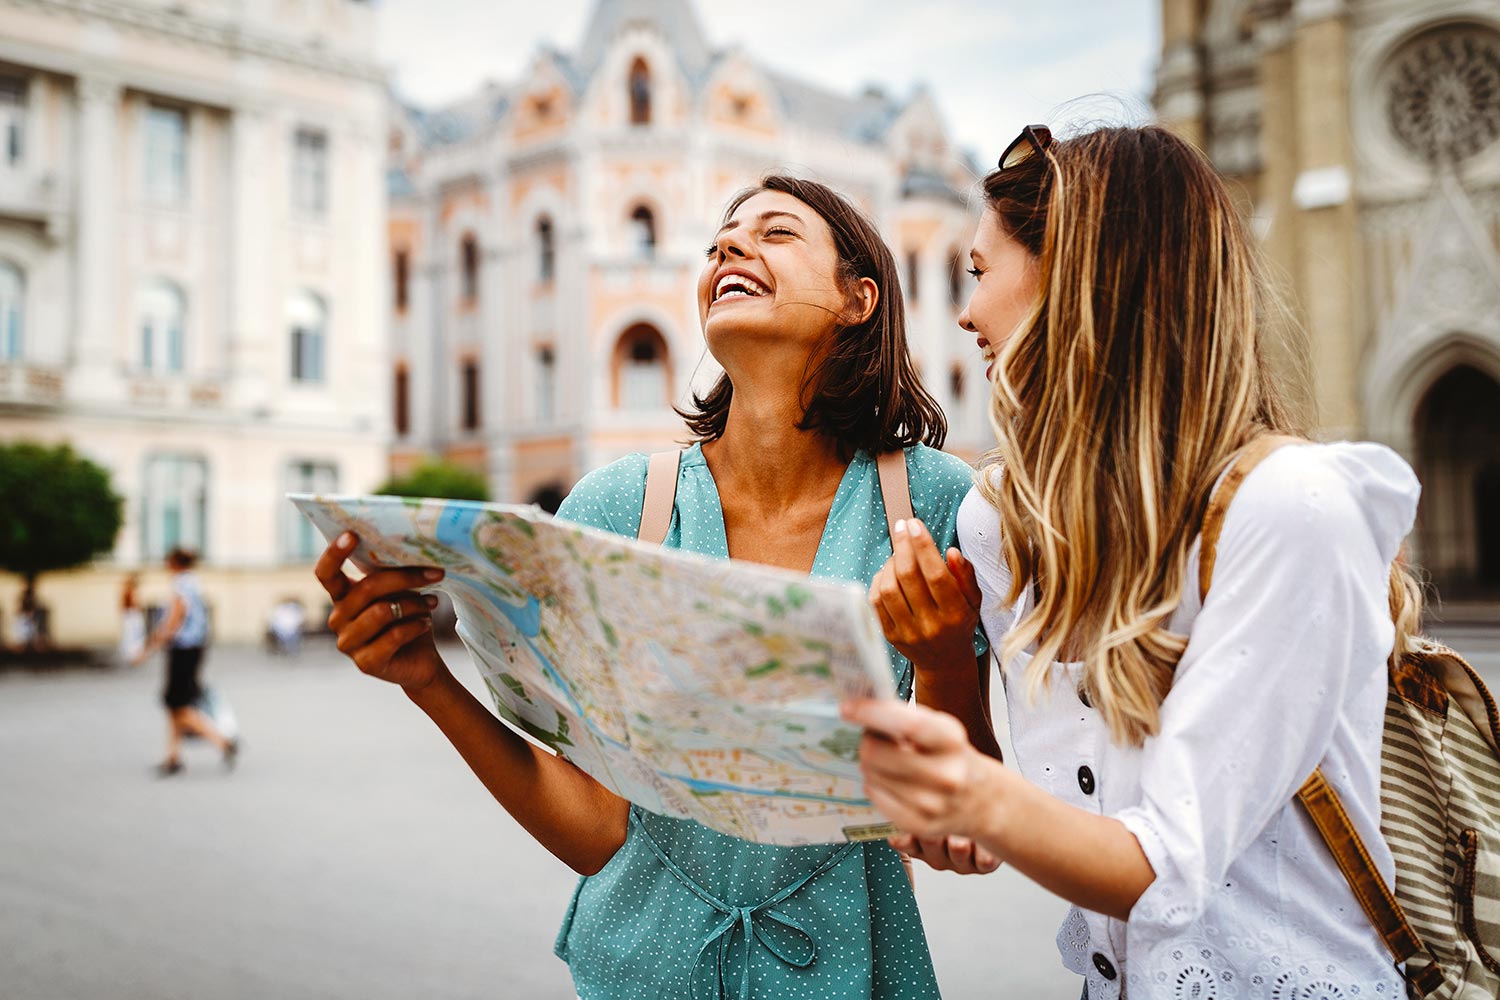 Two young female travelers holding a map and laughing in a European city square.